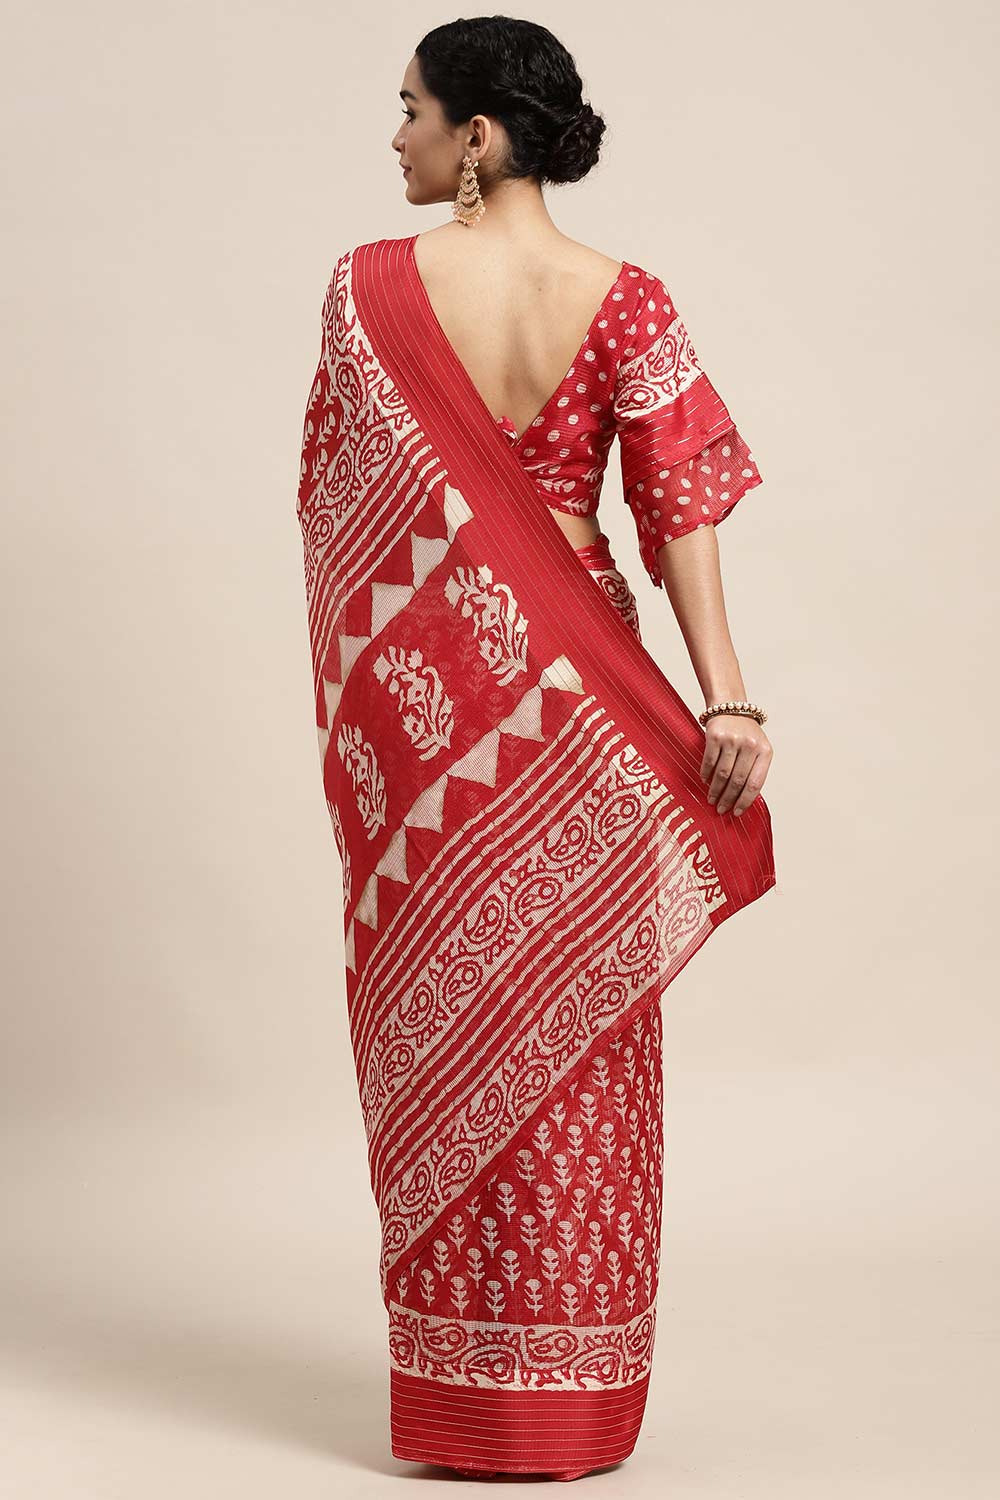 Shop Juhi Red Brasso Batik Ikat Print One Minute Saree at best offer at our  Store - One Minute Saree